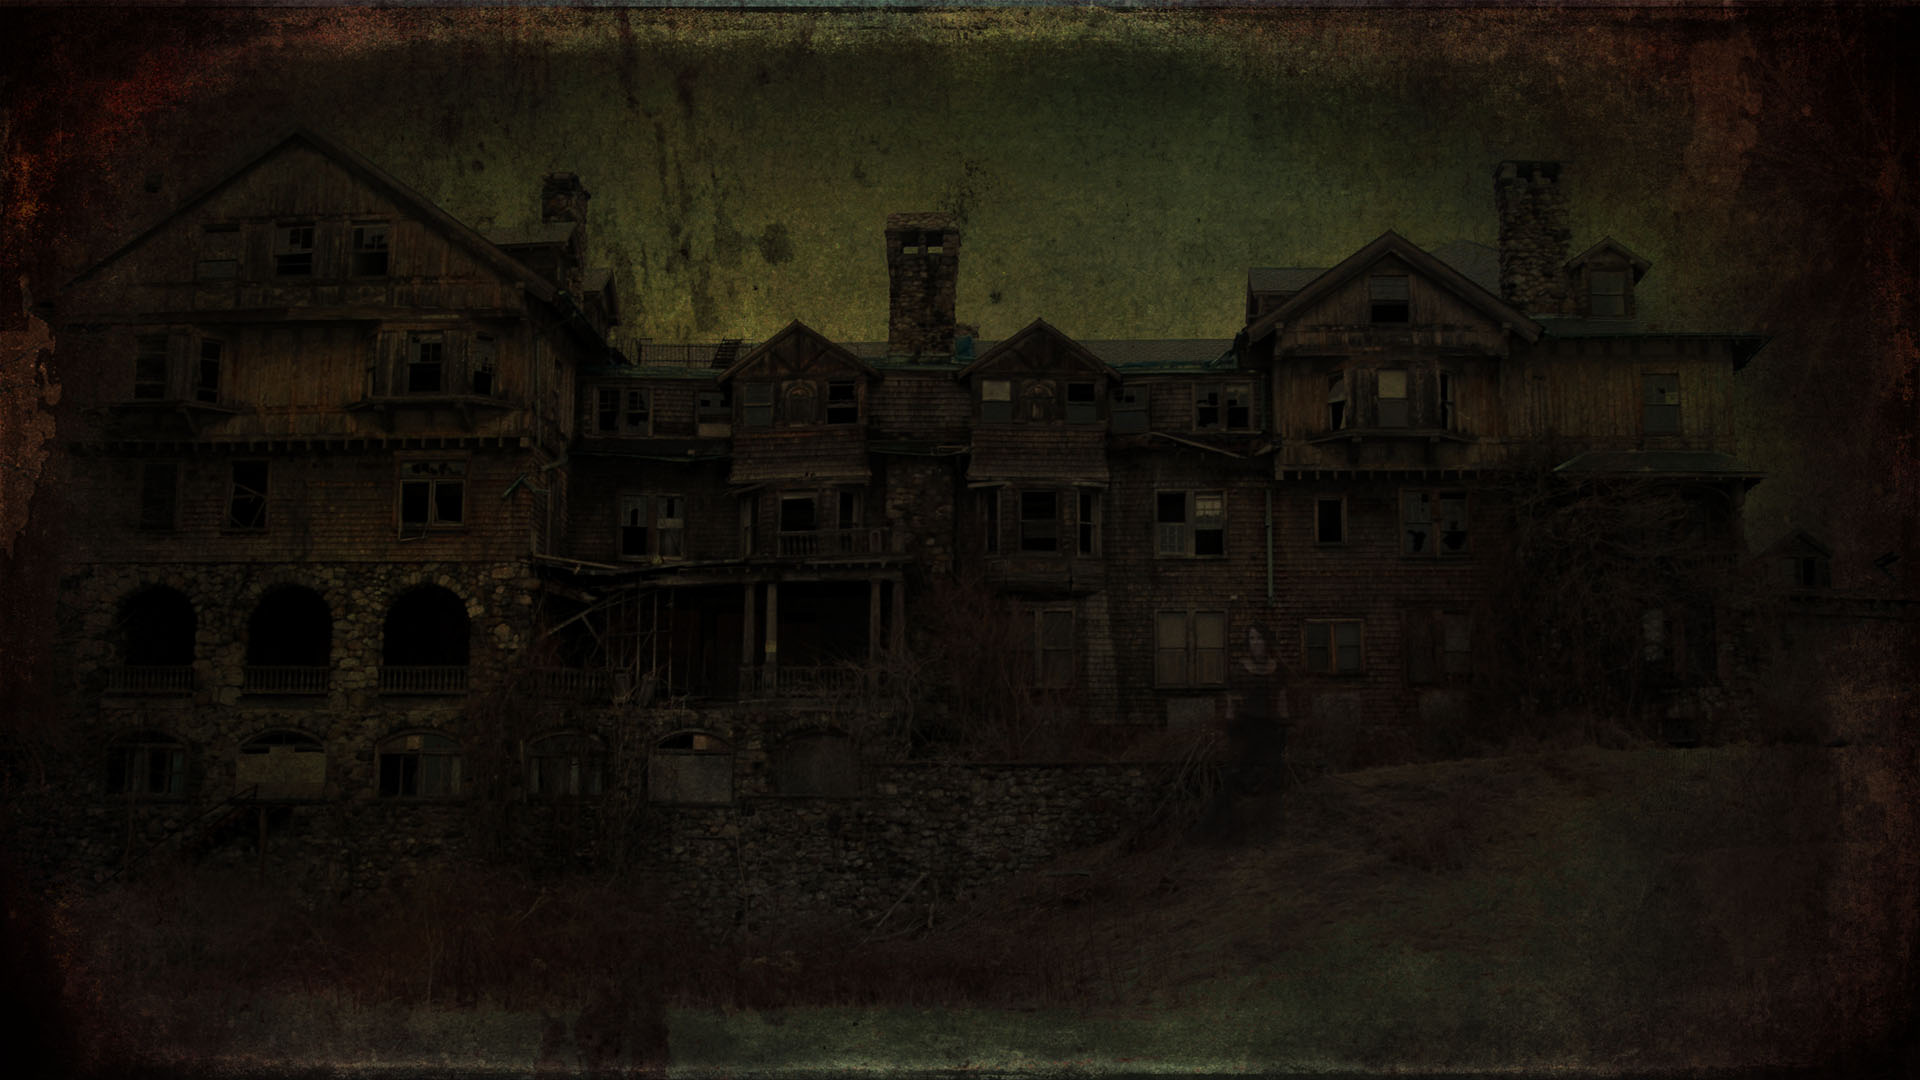 Haunted House wallpapers Haunted House stock photos 1920x1080